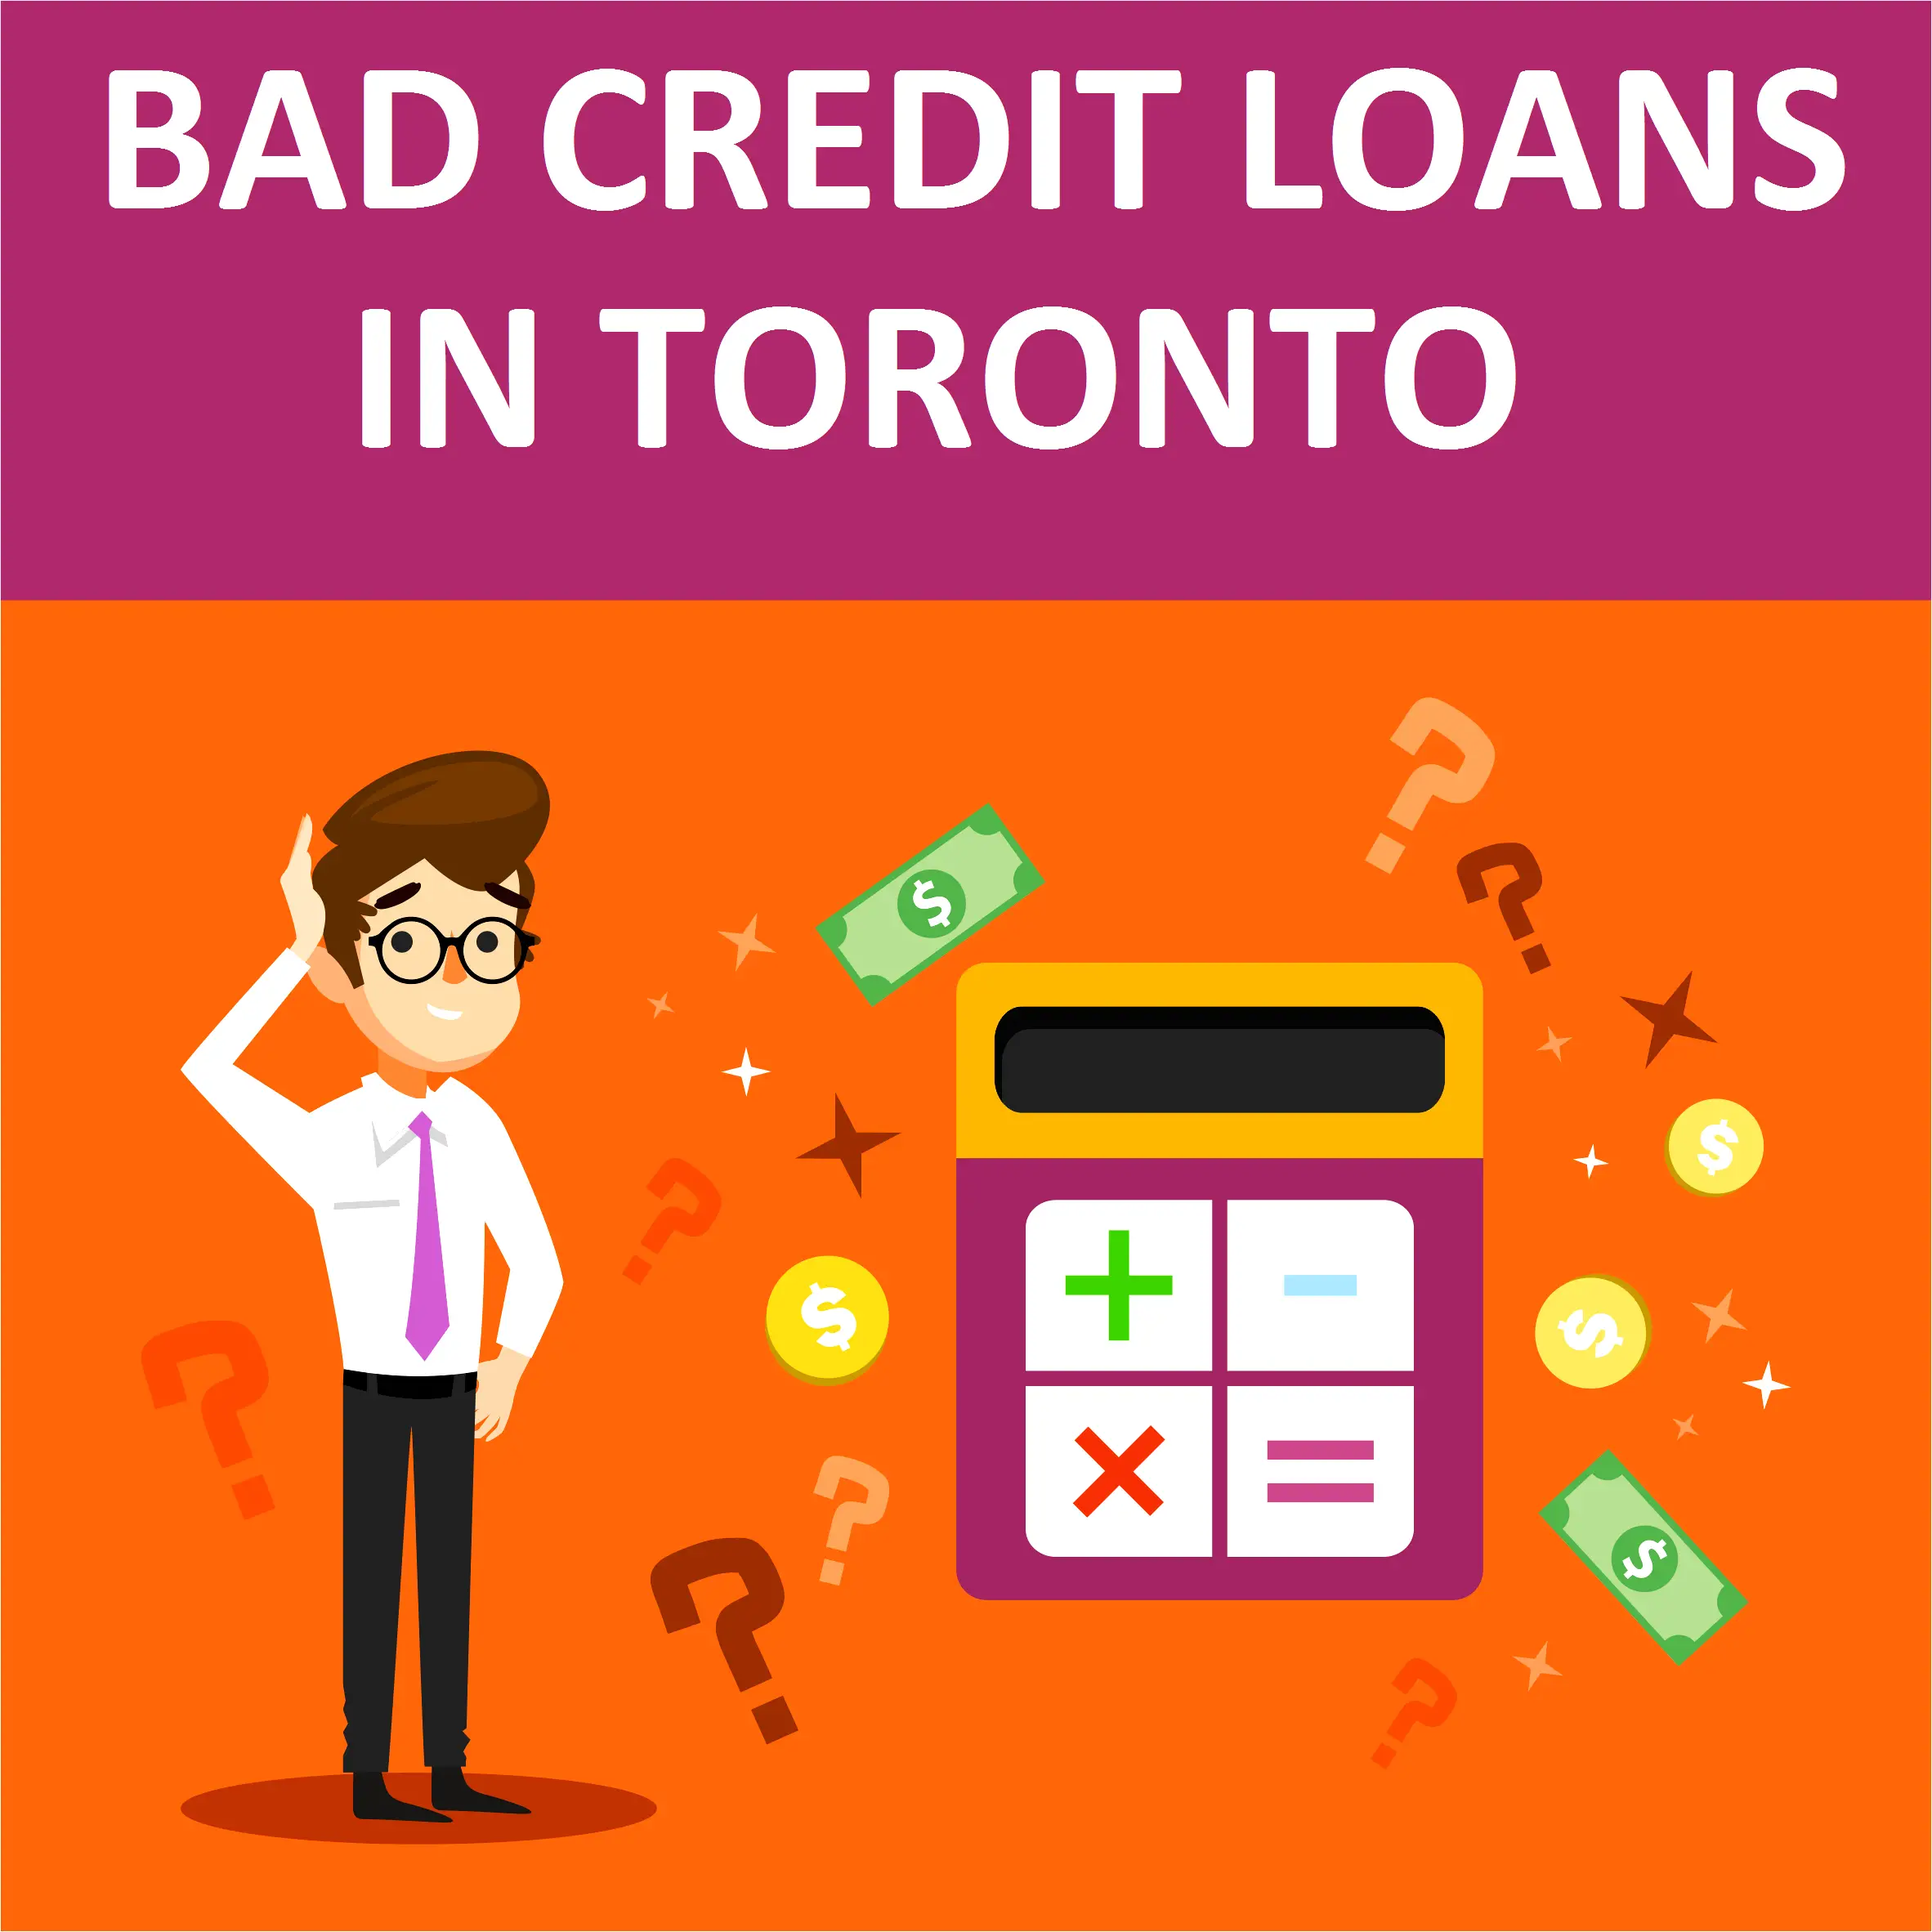 Bad Credit Loans in Toronto. Apply Now!